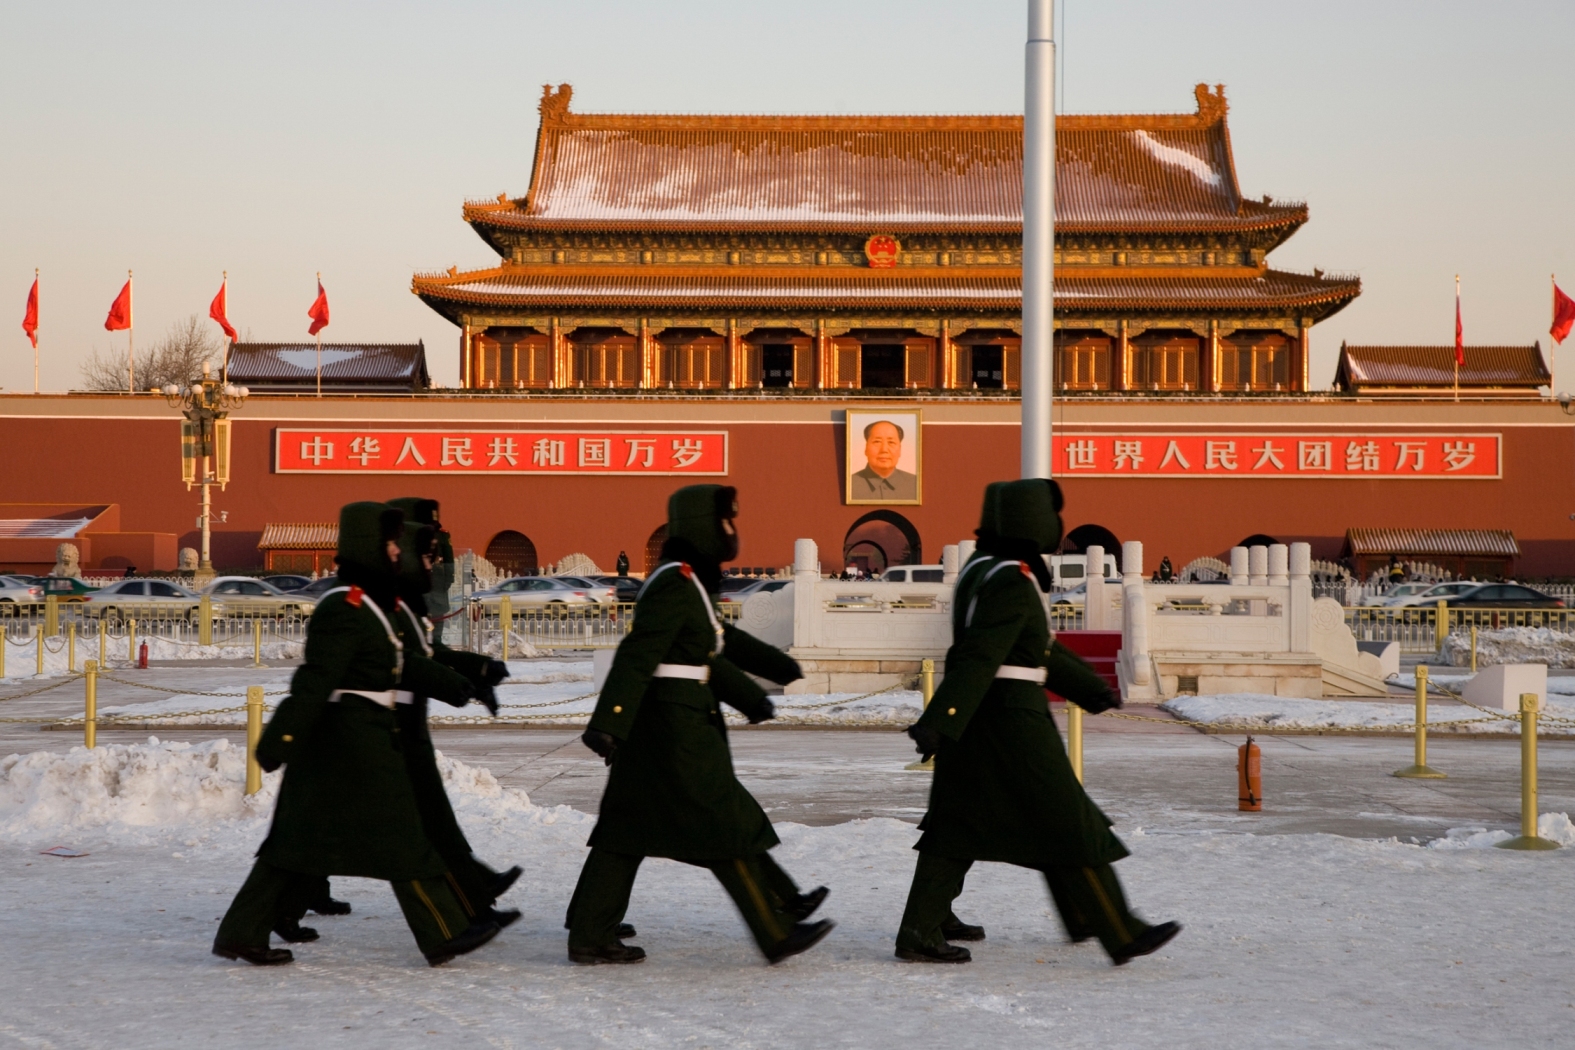 A group of security stuff patrol in Tian'anmen Square after the dawn flag raising ceremony January 16, 2010 in Beijing, China.